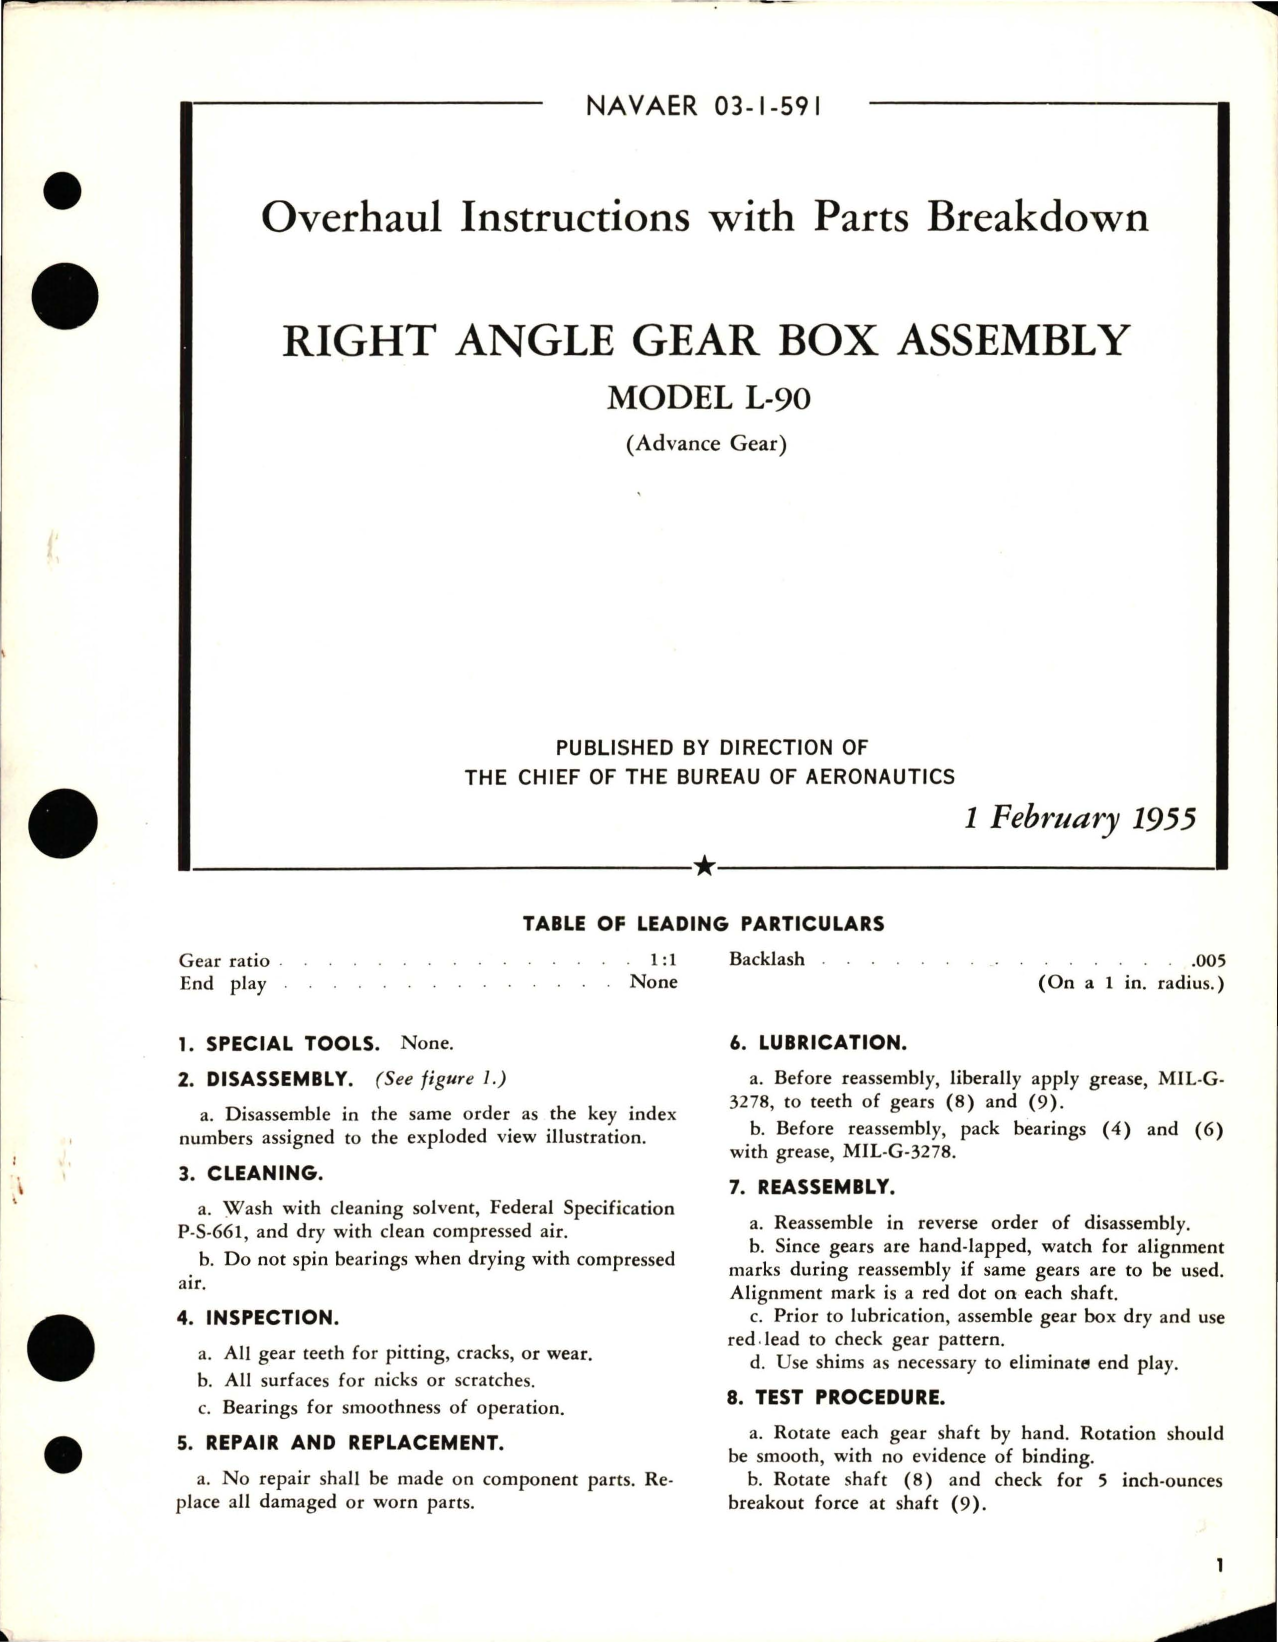 Sample page 1 from AirCorps Library document: Overhaul Instructions with Parts Breakdown for Right Angle Gear Box Assembly - Model L-90 